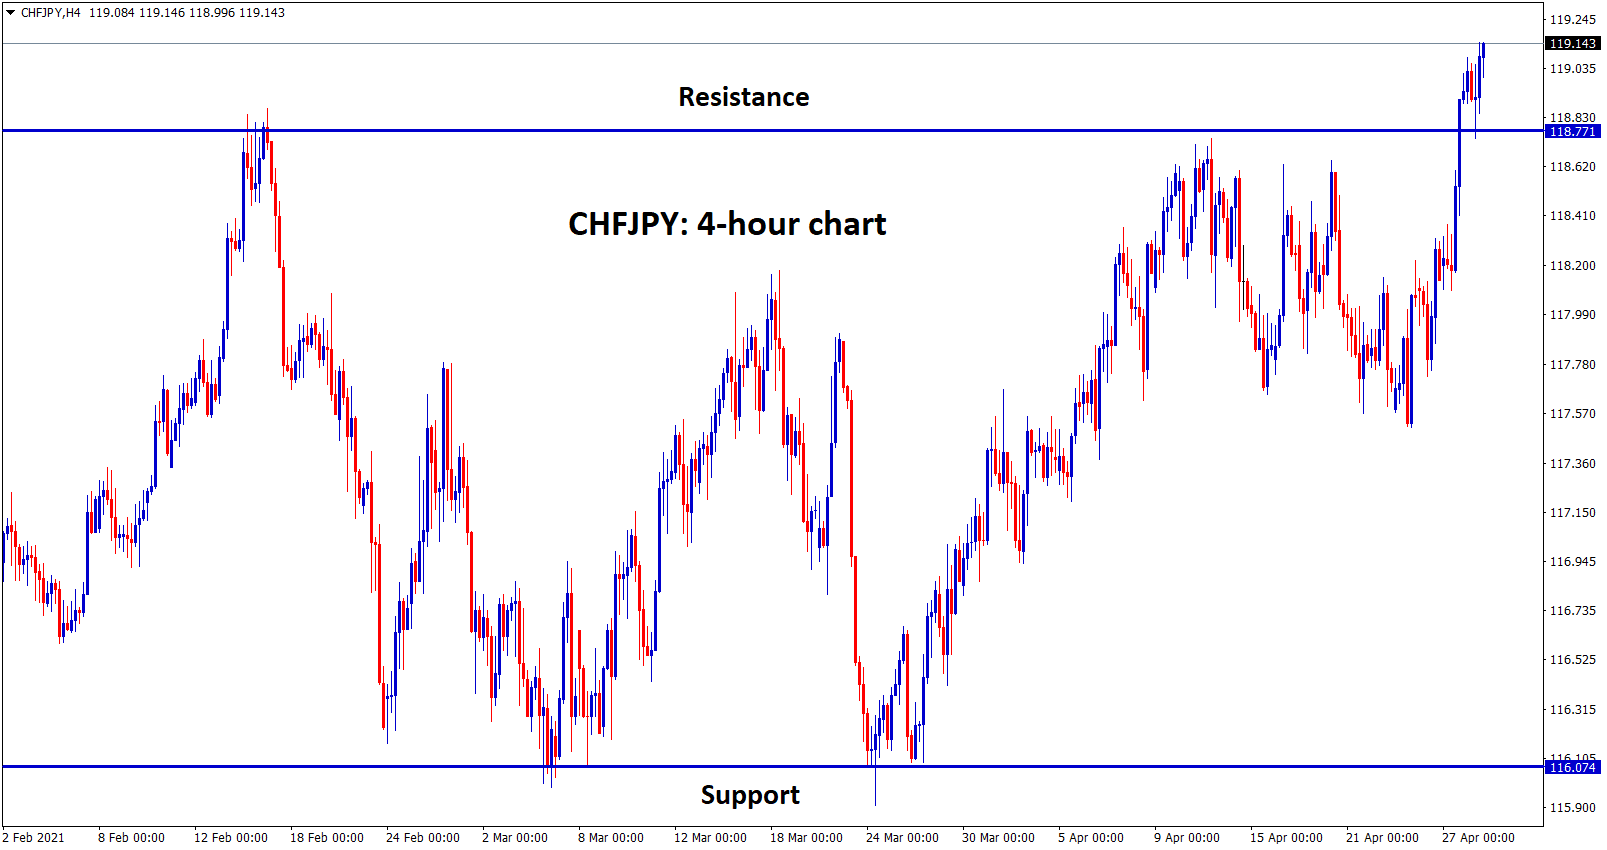 CHFJPY broken the resistance level after a long time